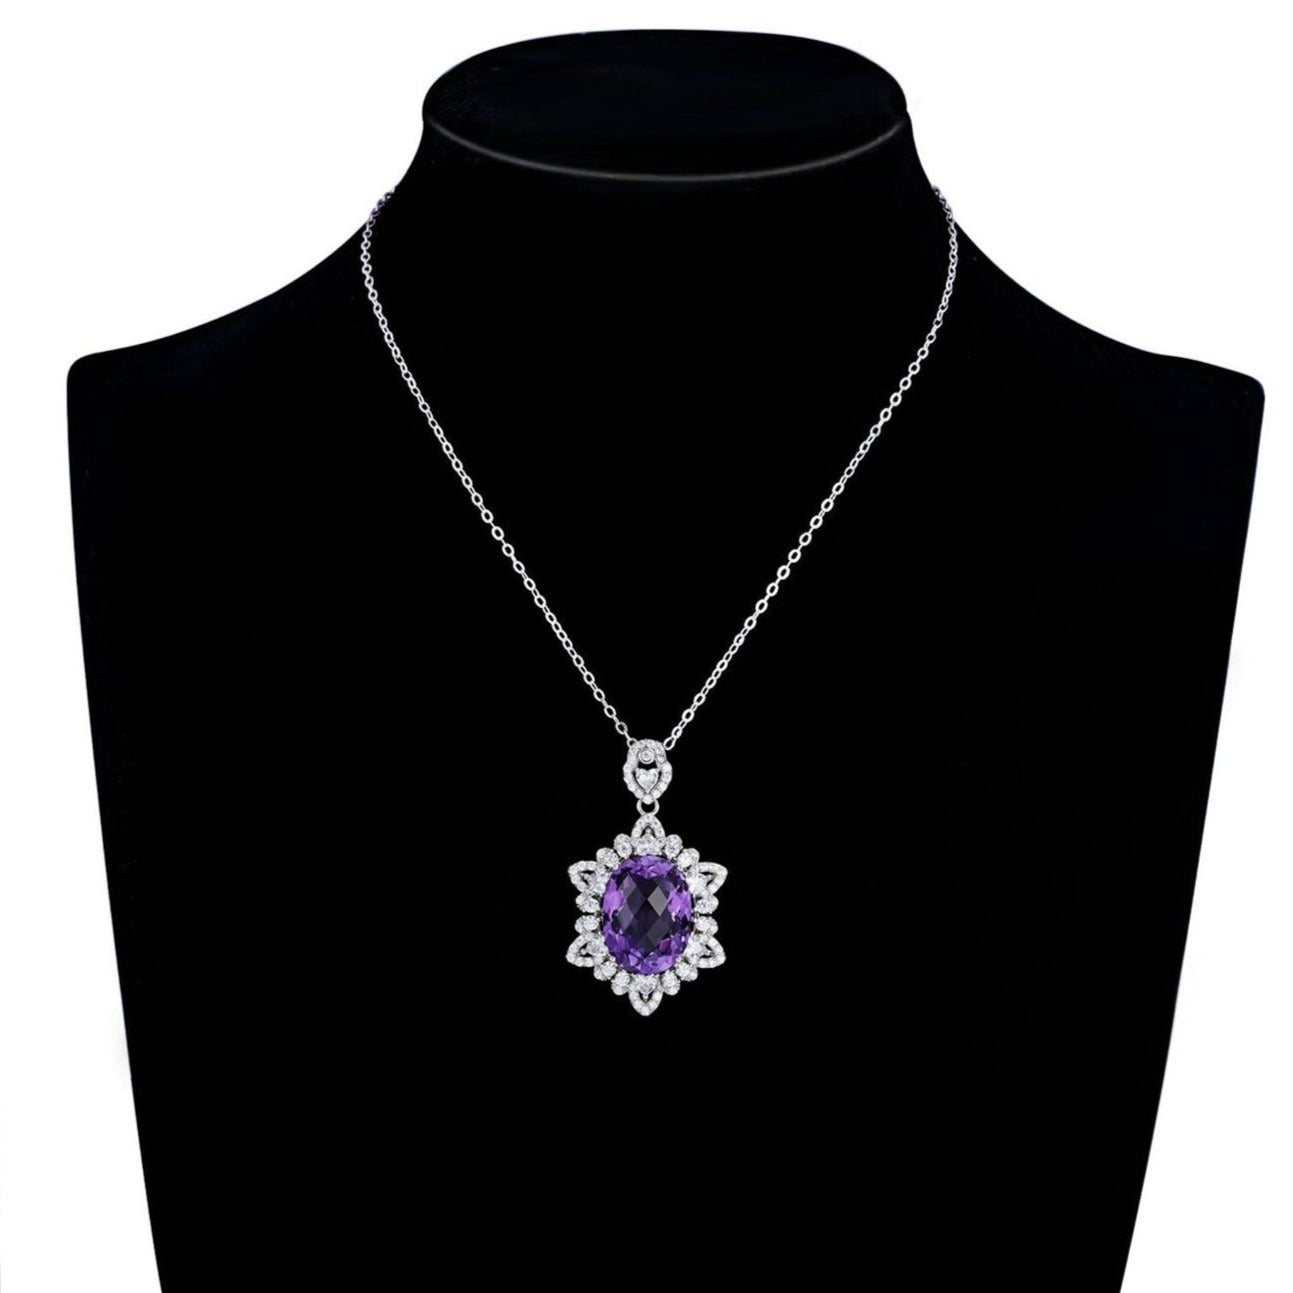 Womens Natural Amethyst Necklace  in 925 Sterling Silver - Elegant - Silver/Purple - A.A.Y FASHION